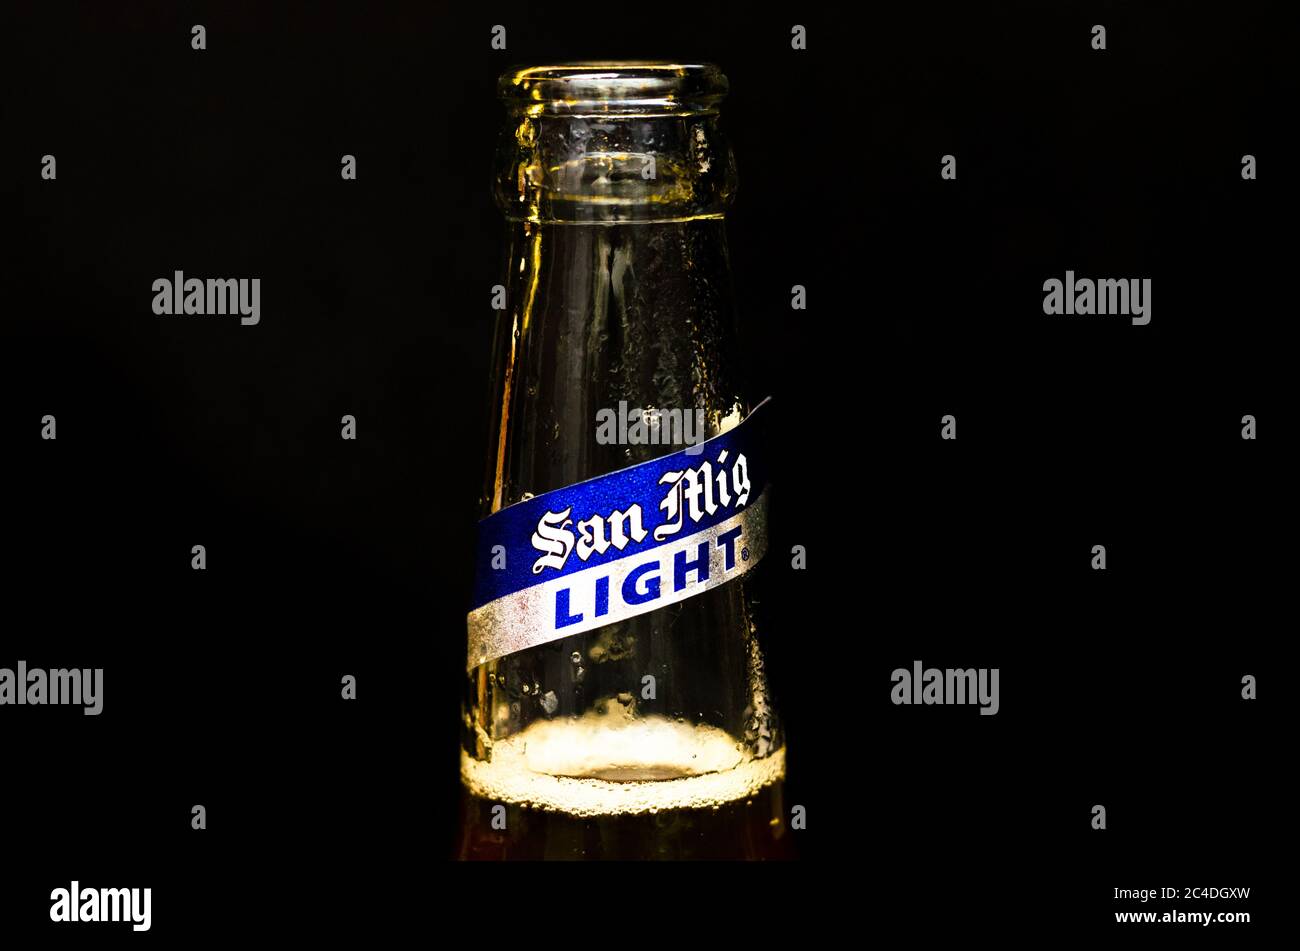 Close up view of the bottle mouth of San Miguel Light beer with silver and blue label in a black marble background Stock Photo